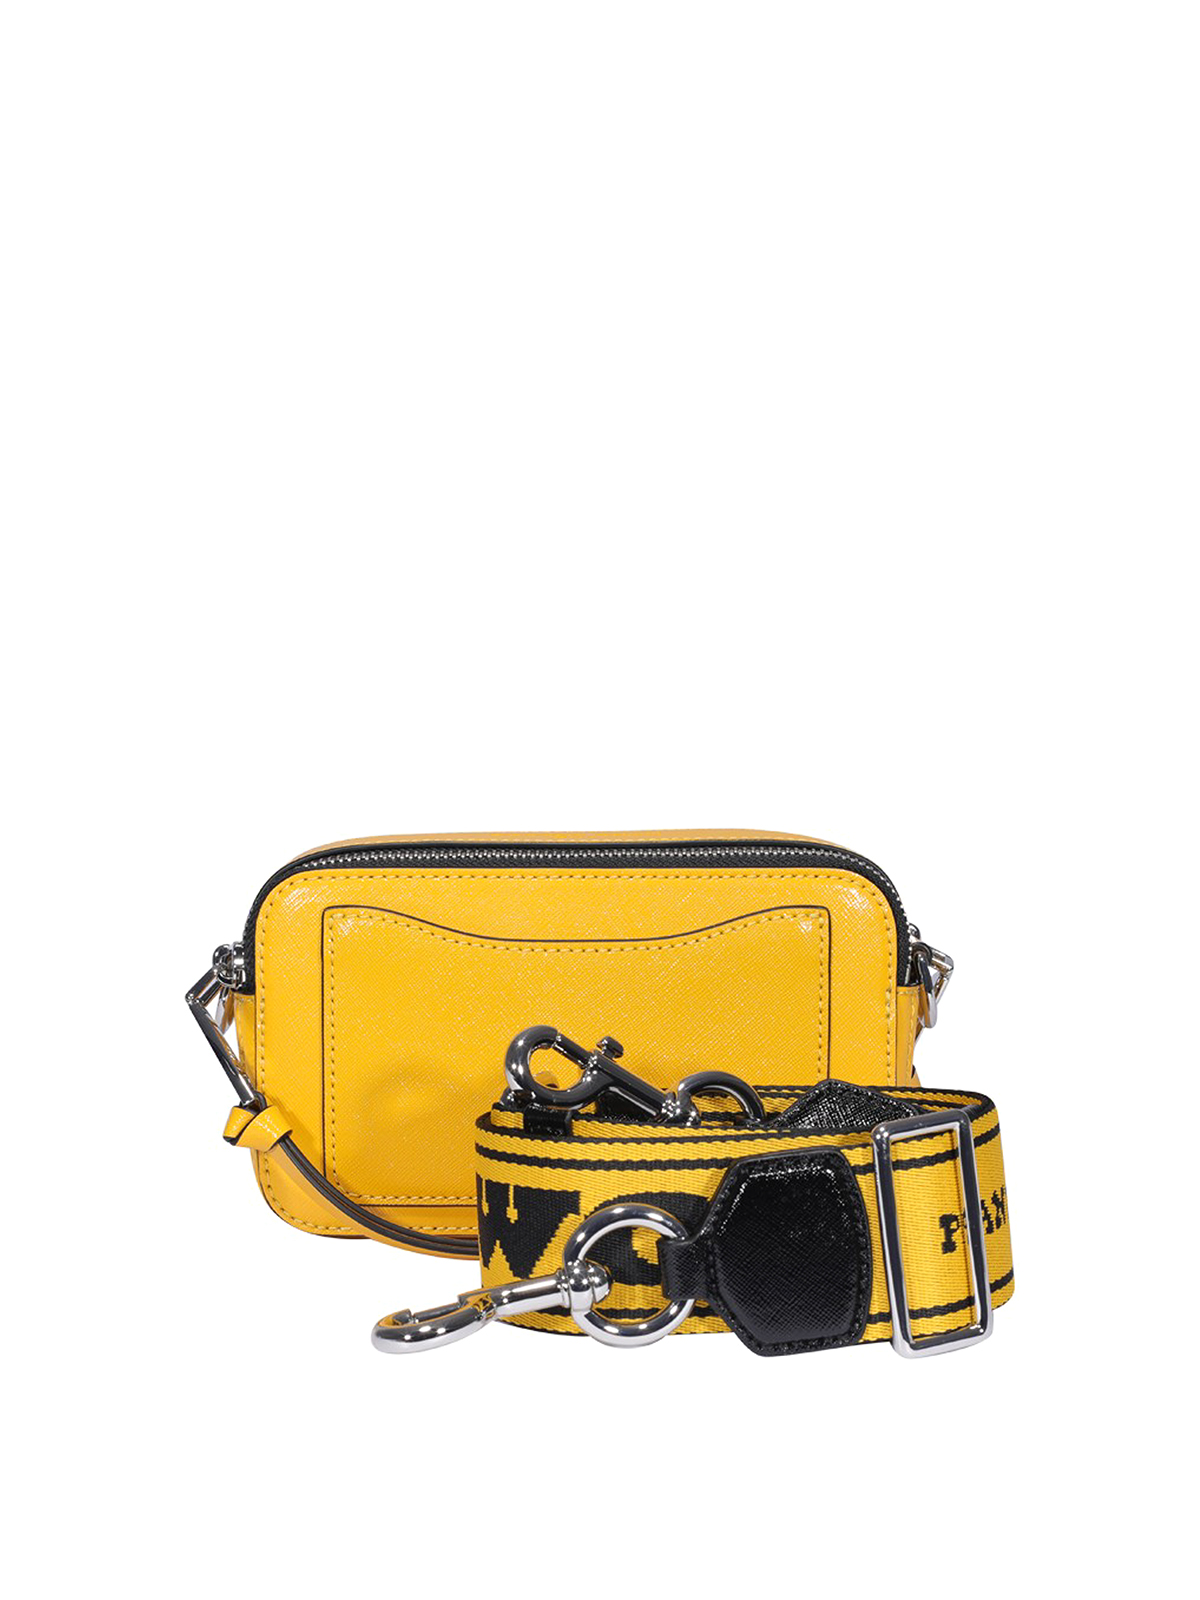 Marc Jacobs Sac a bandouliere Peanuts x The Snapshot vert - 'The